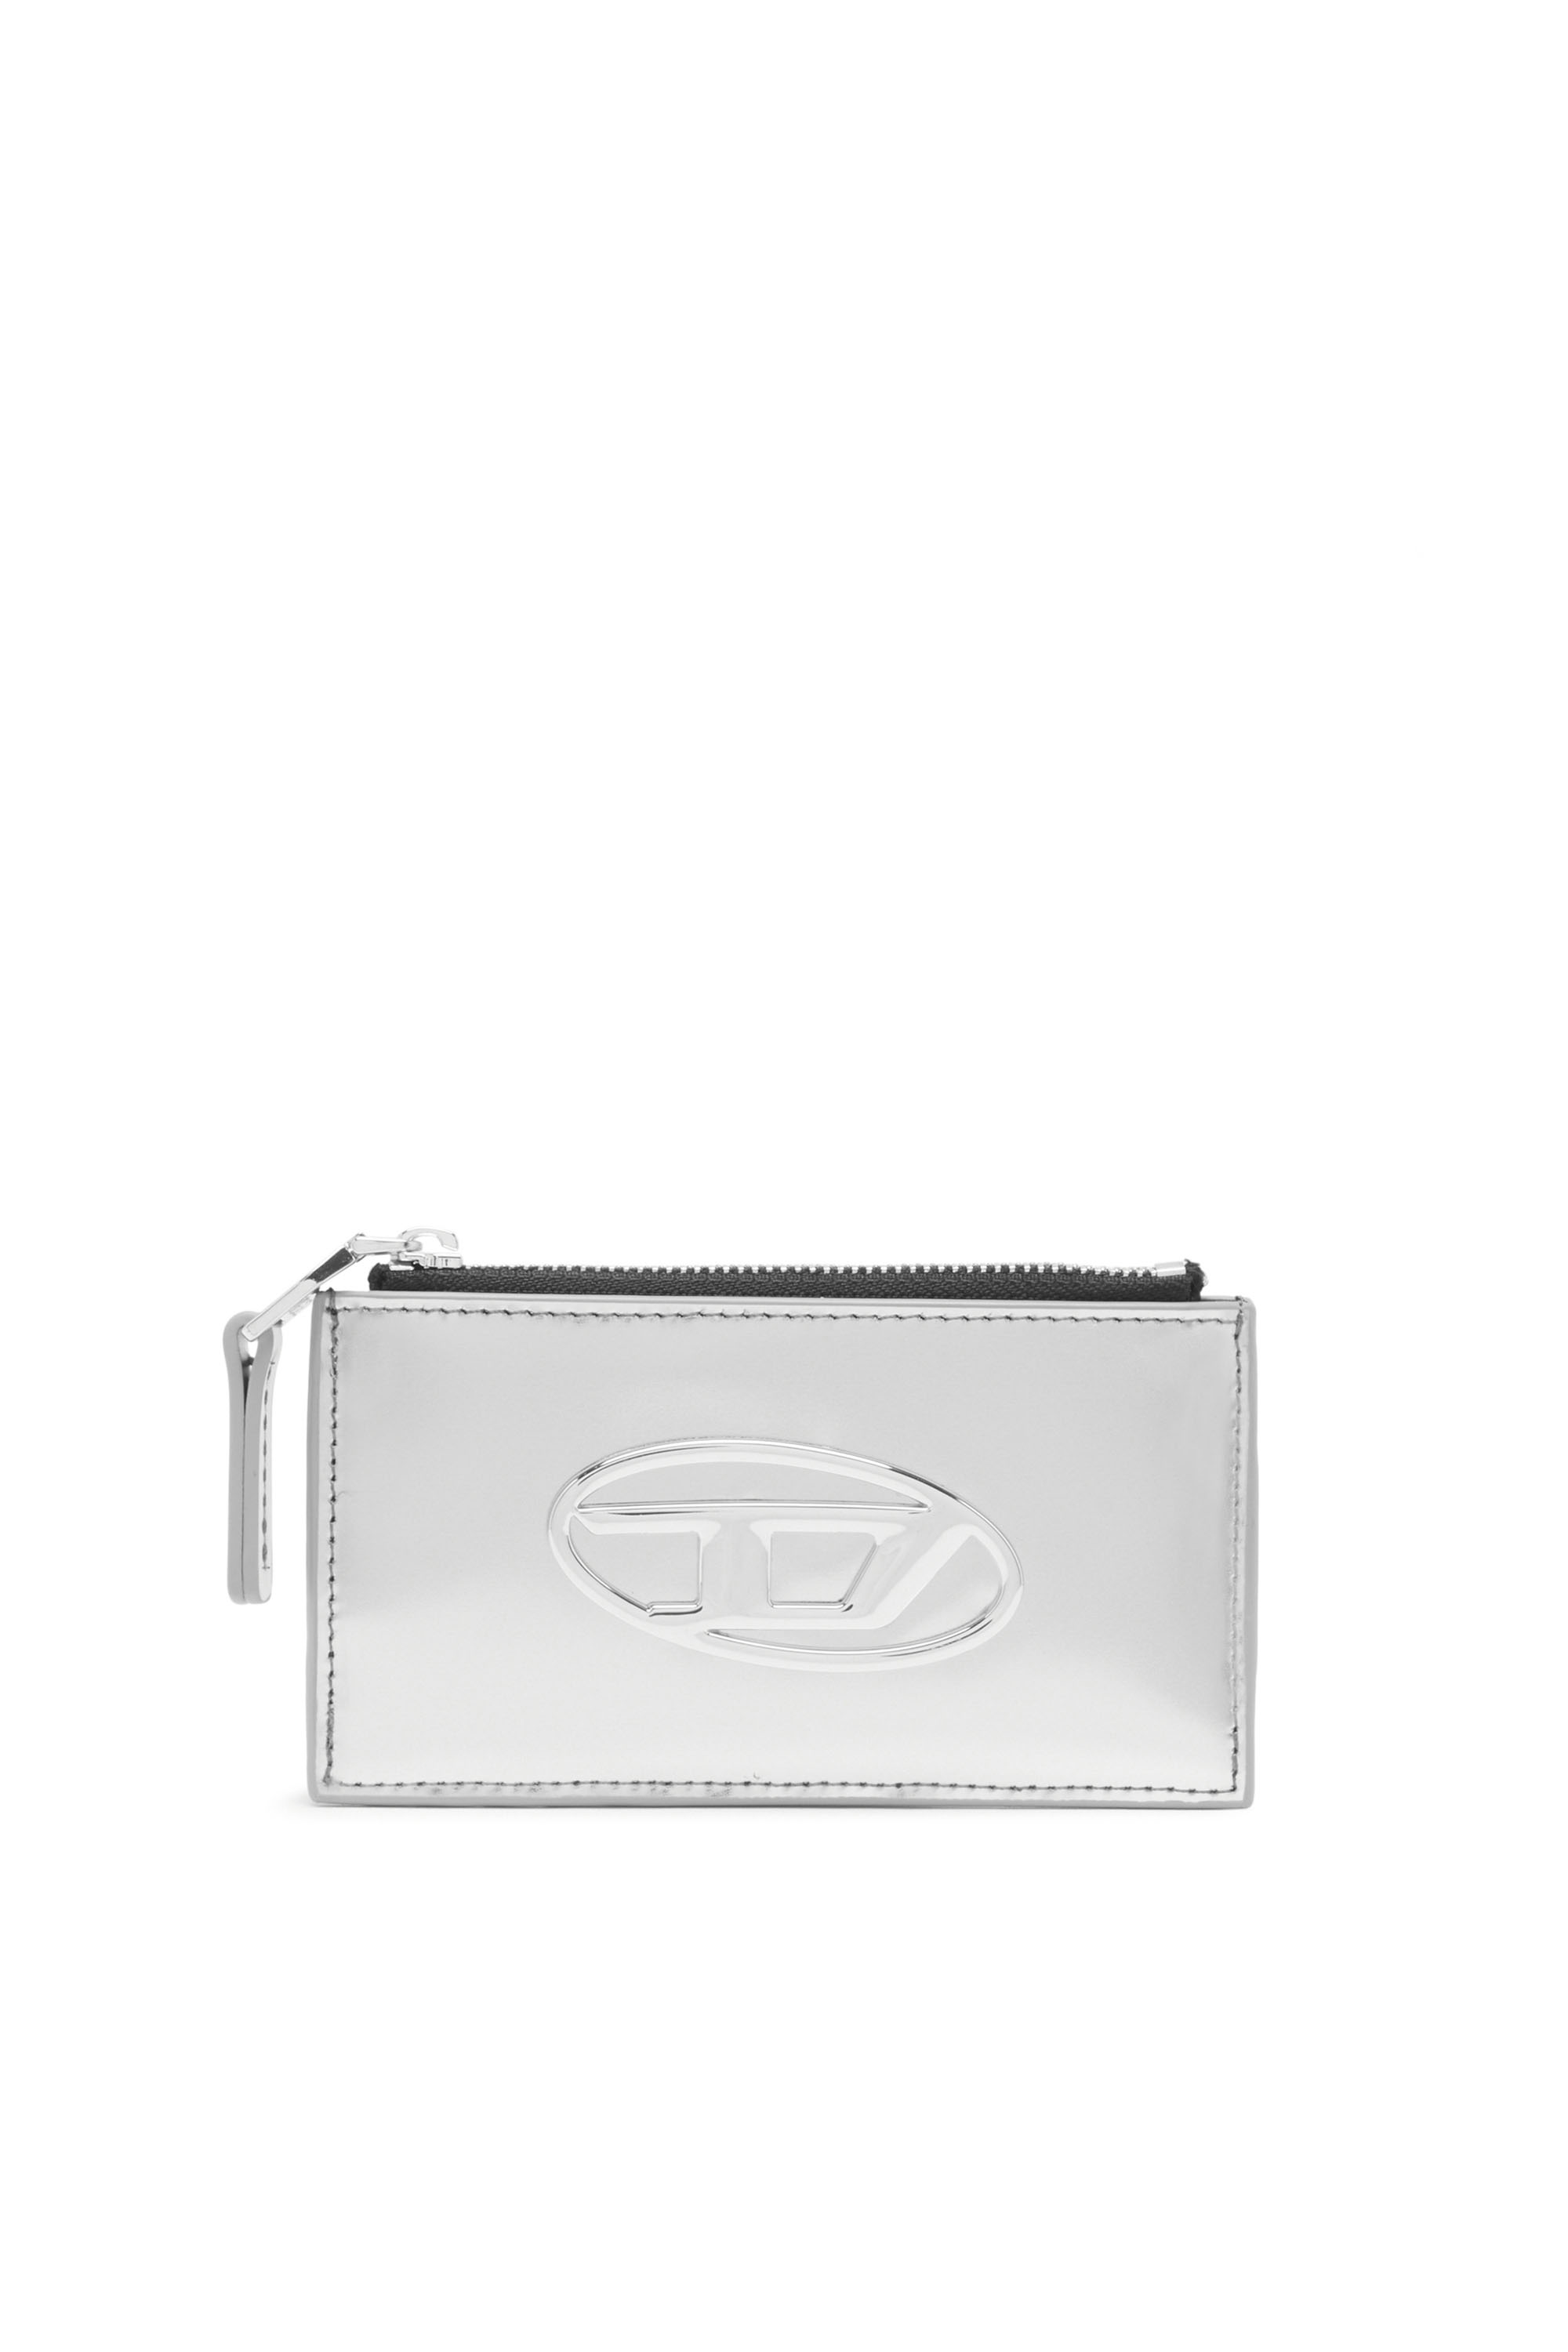 Diesel - CARD HOLDER COIN S, Silver - Image 1